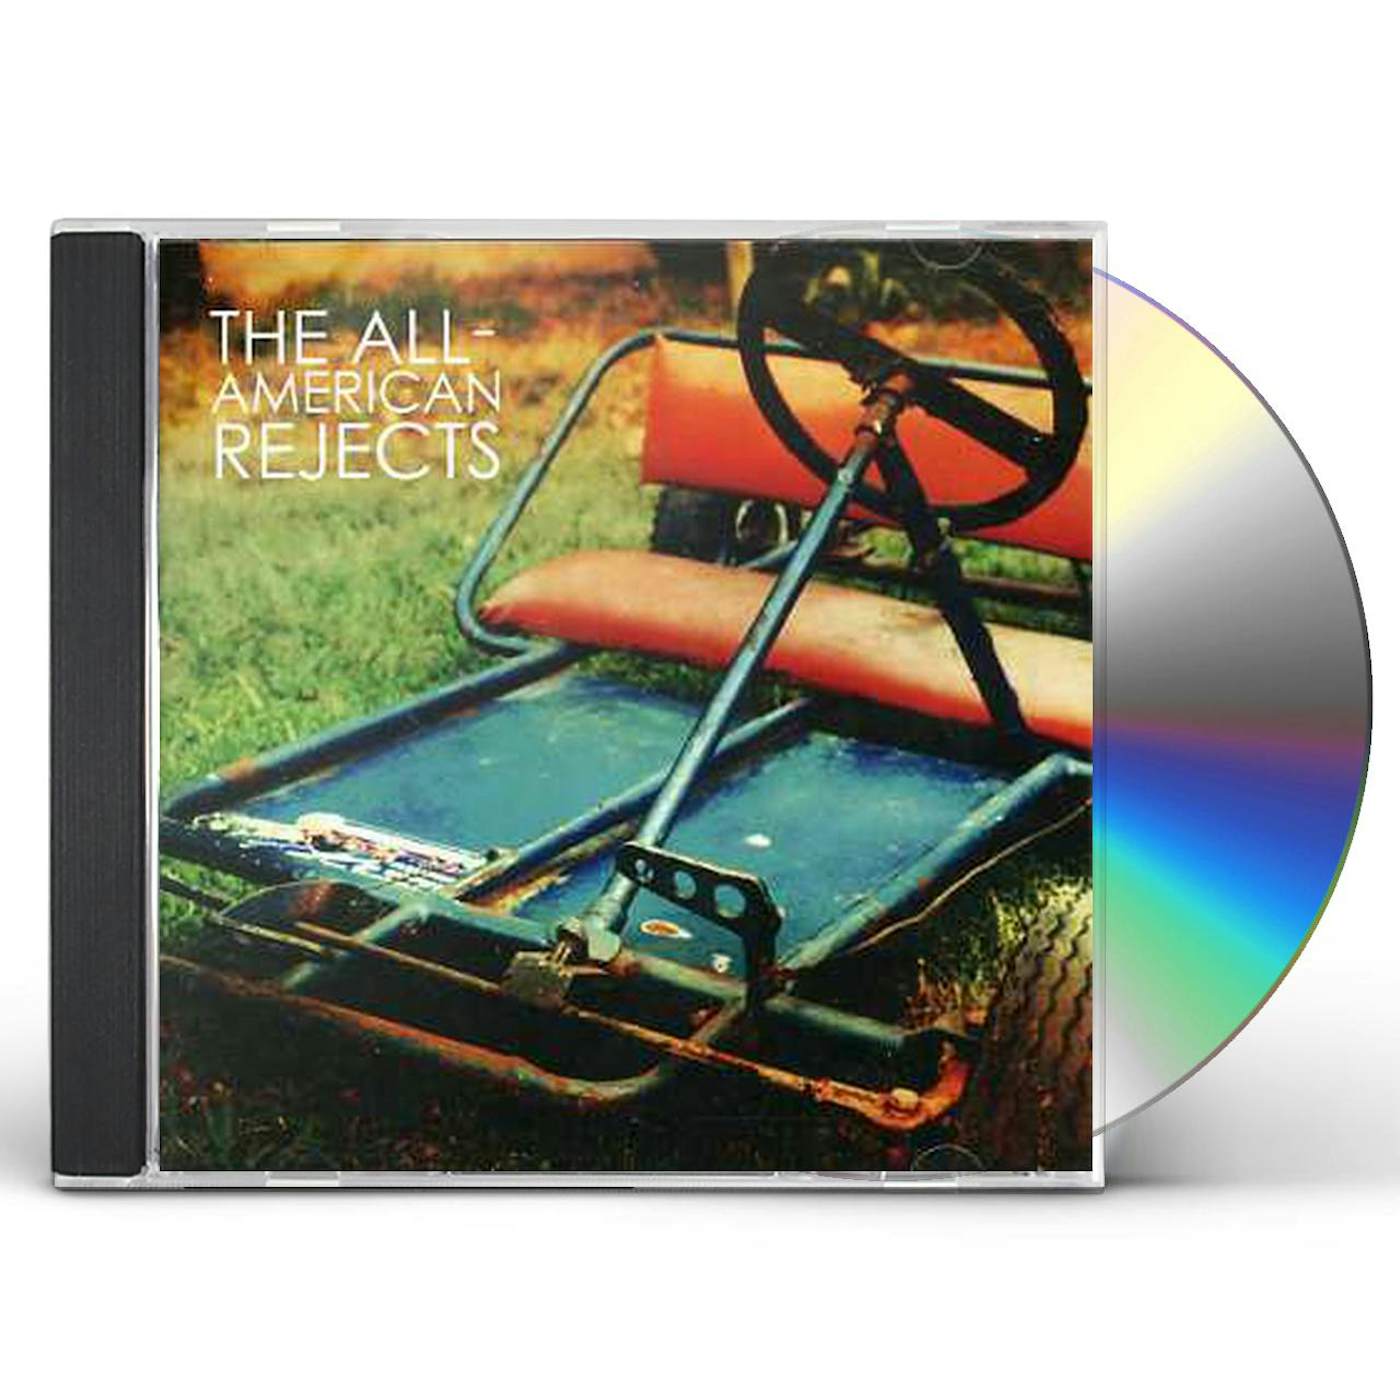 The All-American Rejects CD